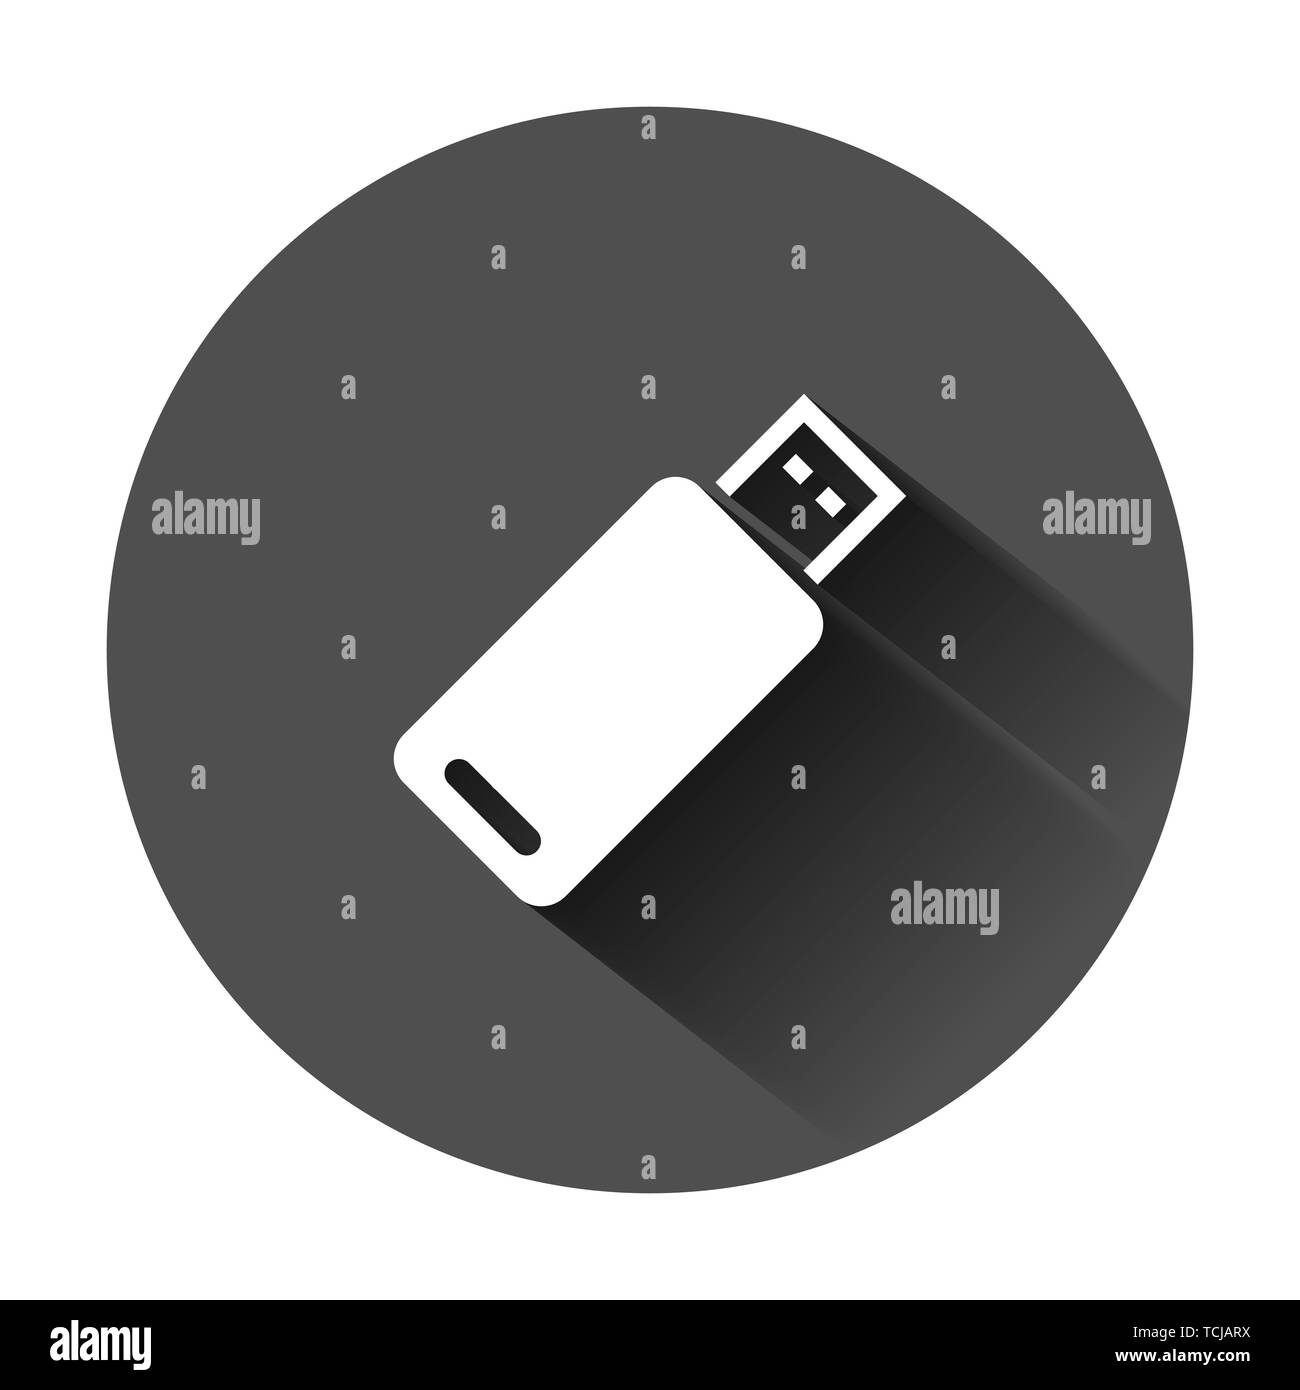 Usb drive icon in flat style. Flash disk vector illustration on black round background with long shadow. Digital memory business concept. Stock Vector